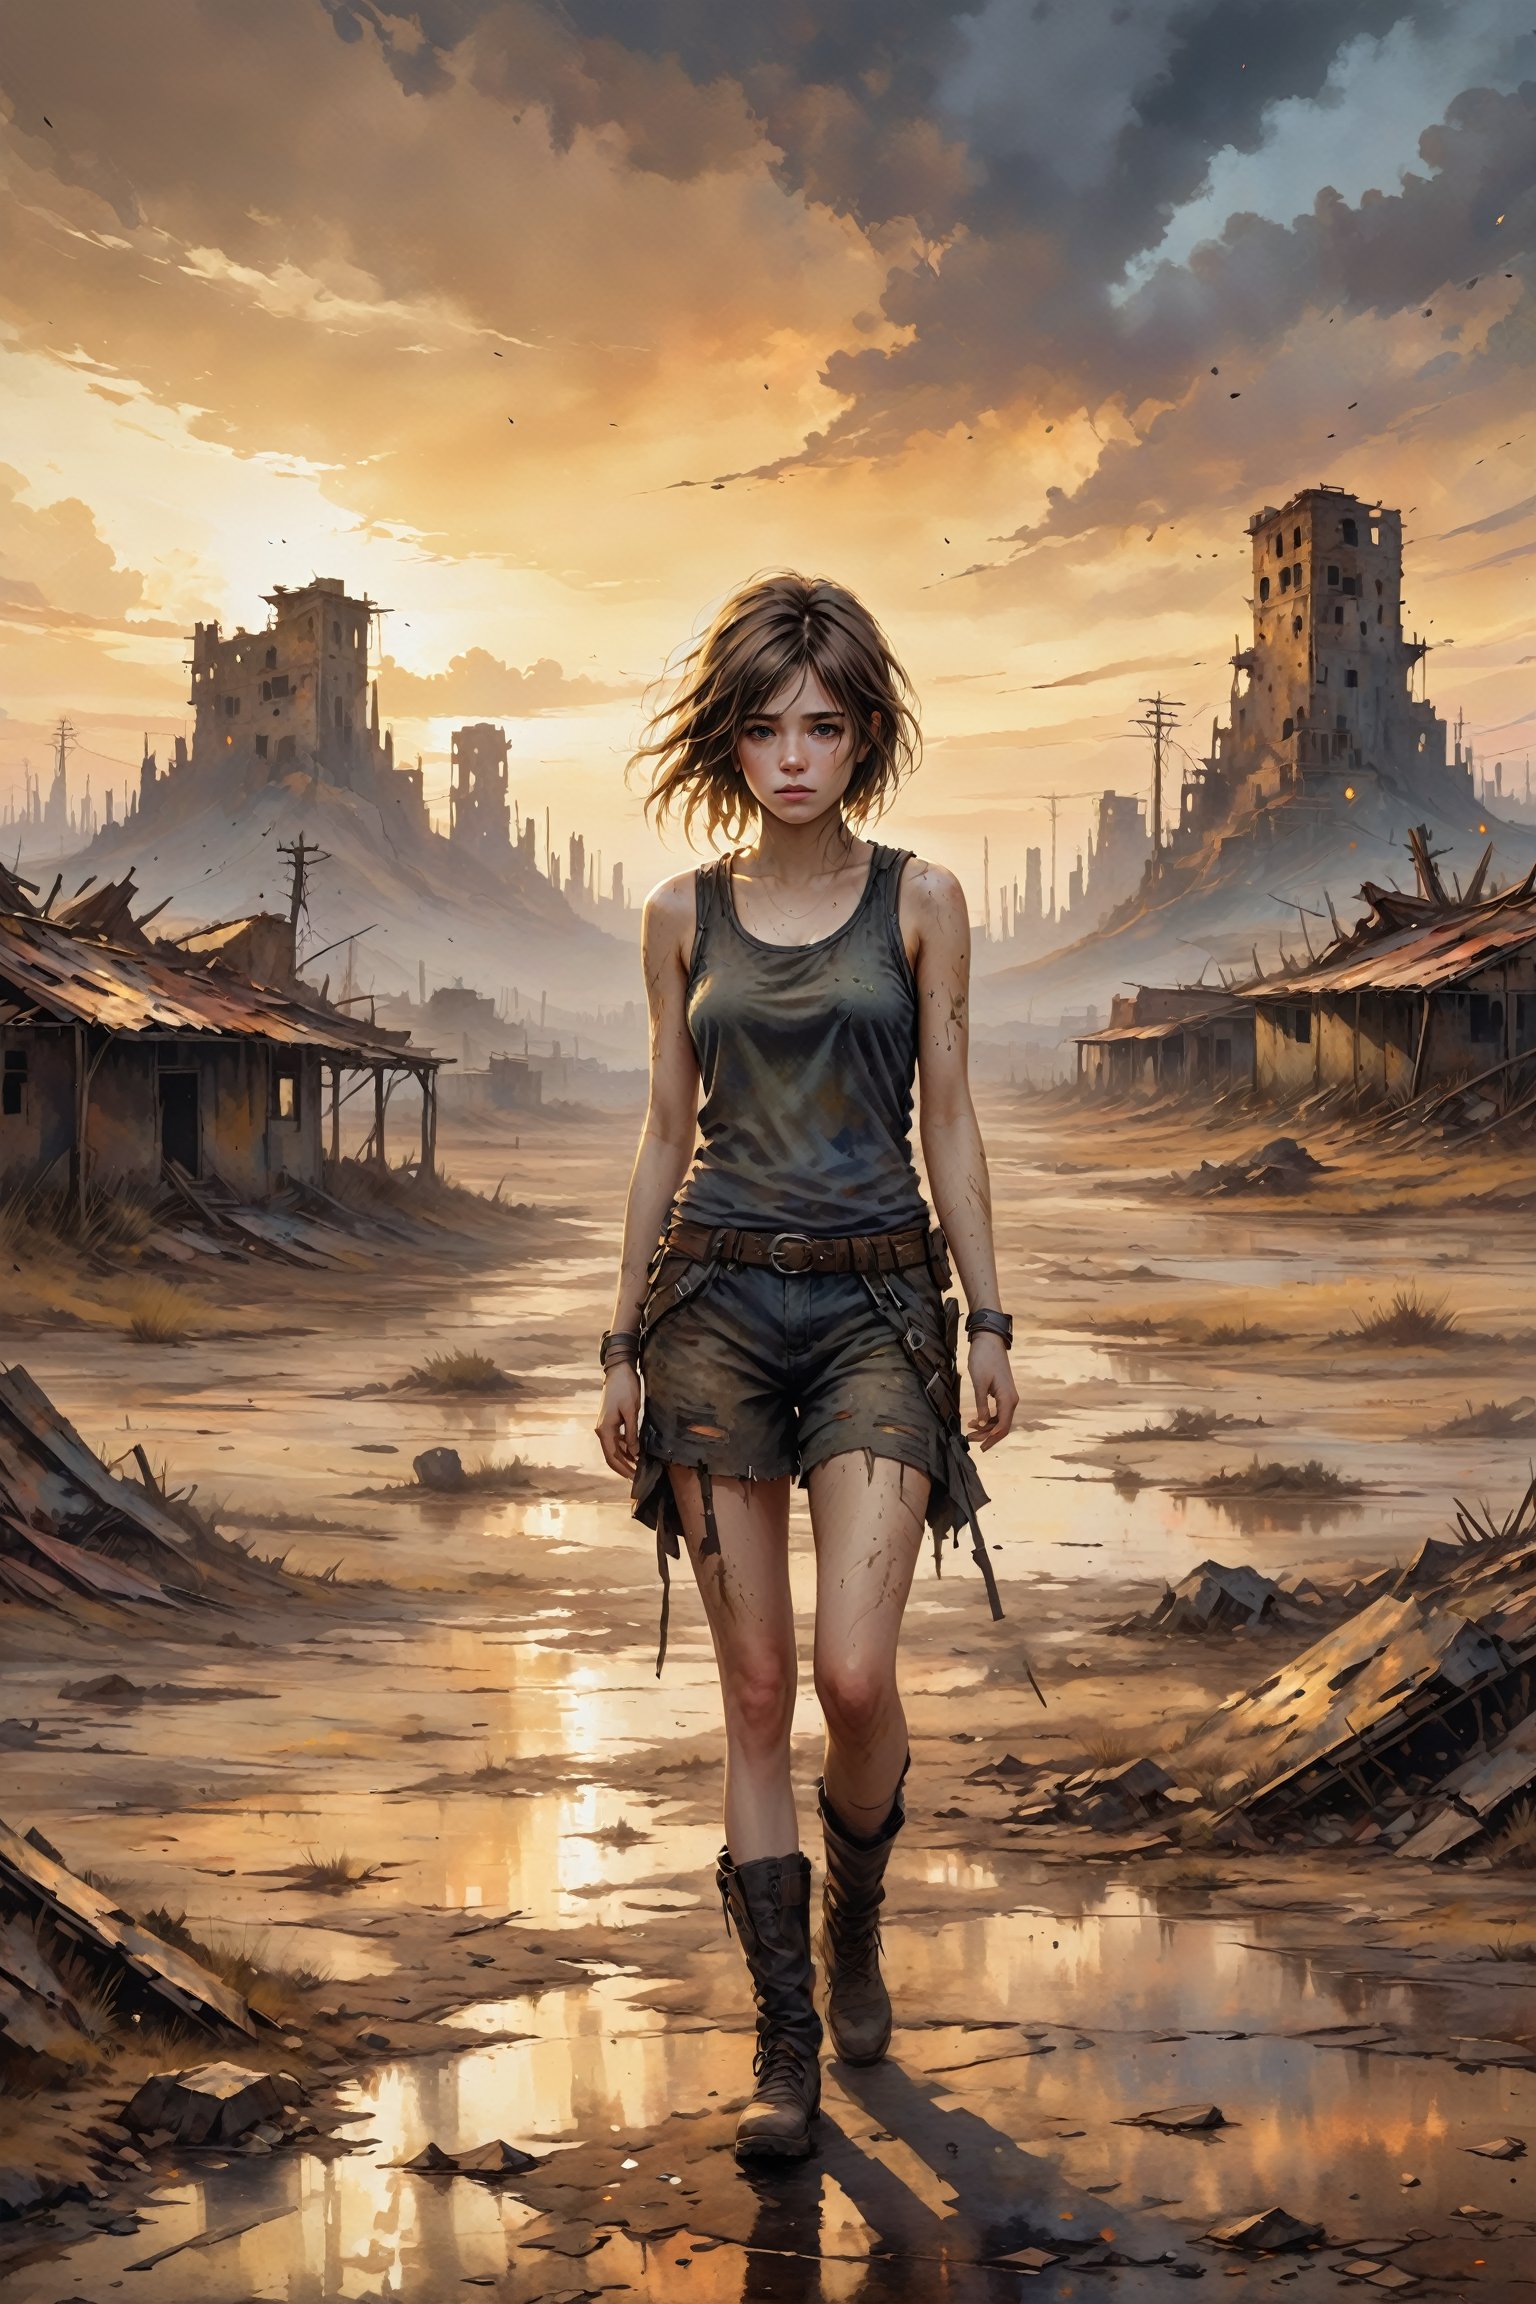 "oil painting, highly detailed, a young girl wandering through a barren wasteland, expression of deep sadness and depression, remnants of a shattered world around her, dark and moody color palette, strokes conveying the texture of dirt and decay, cloudy sky with hints of a setting sun, feeling of loneliness and despair, ((post-apocalyptic)) theme, torn and dirty clothes, scattered ruins"